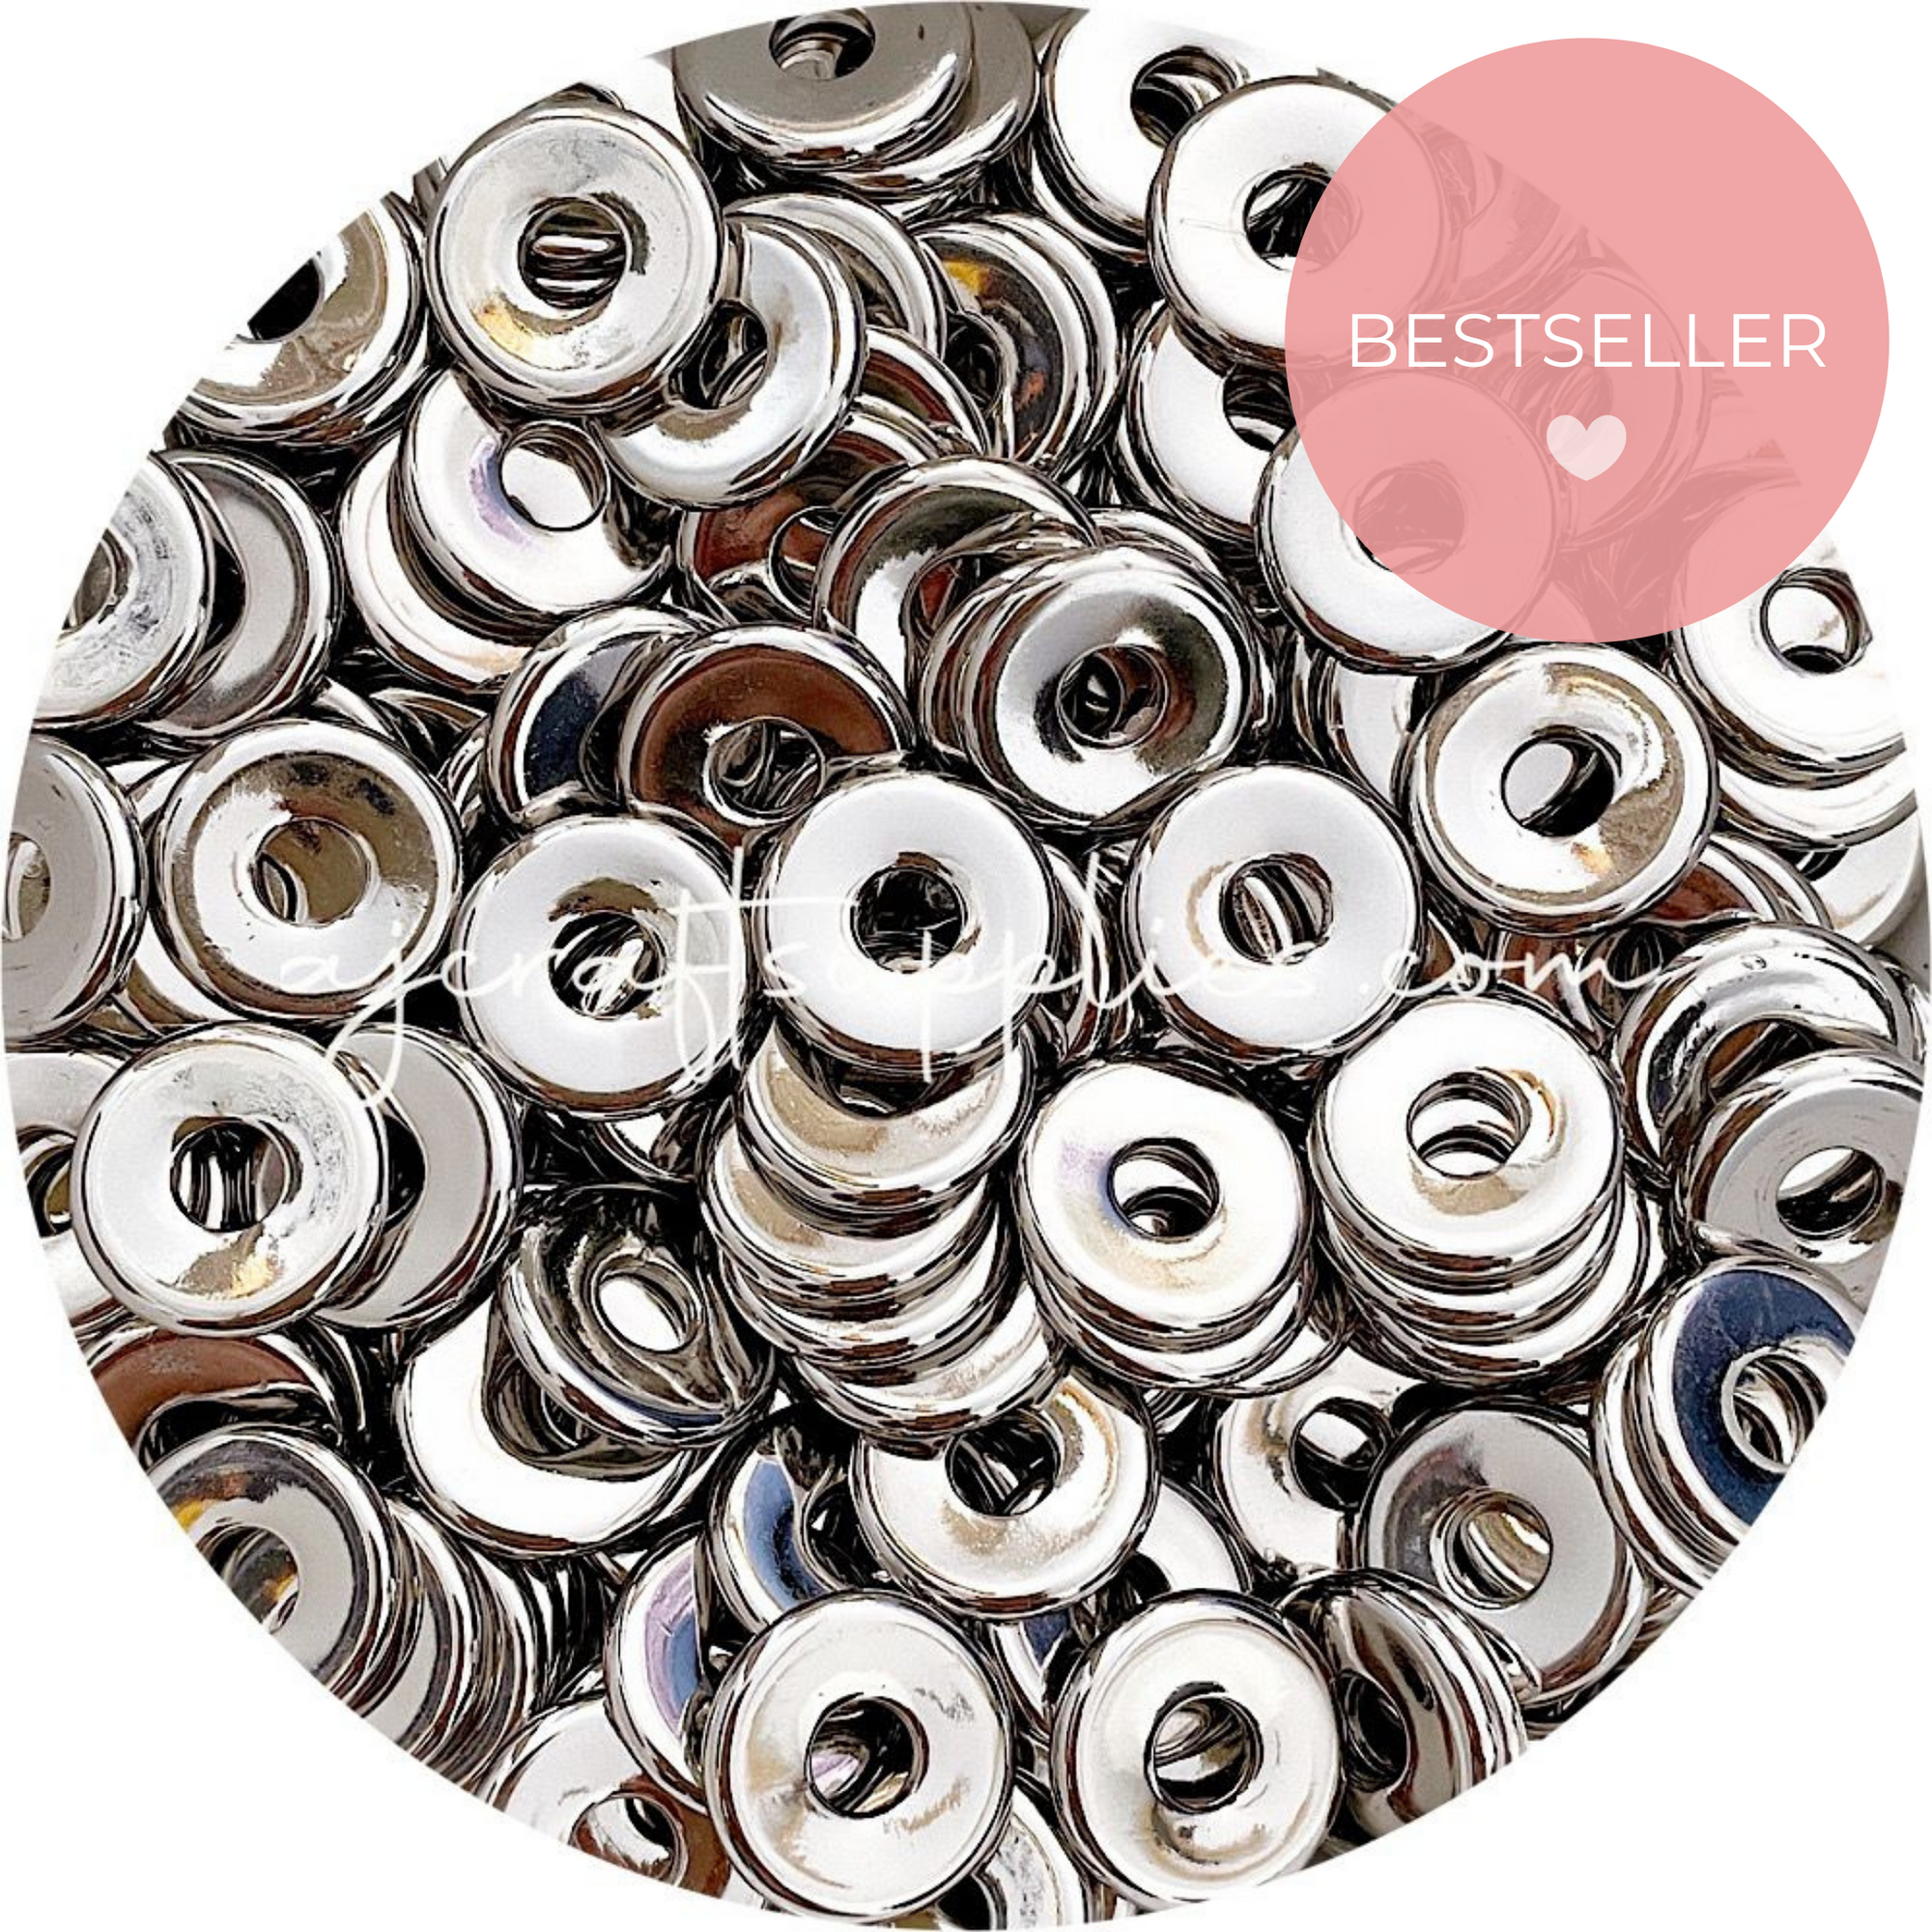 (RESTOCK ETA - LATE MAY) 20mm Flat Coin Acrylic Spacer Beads (with Large Hole) - Silver - 5 Beads